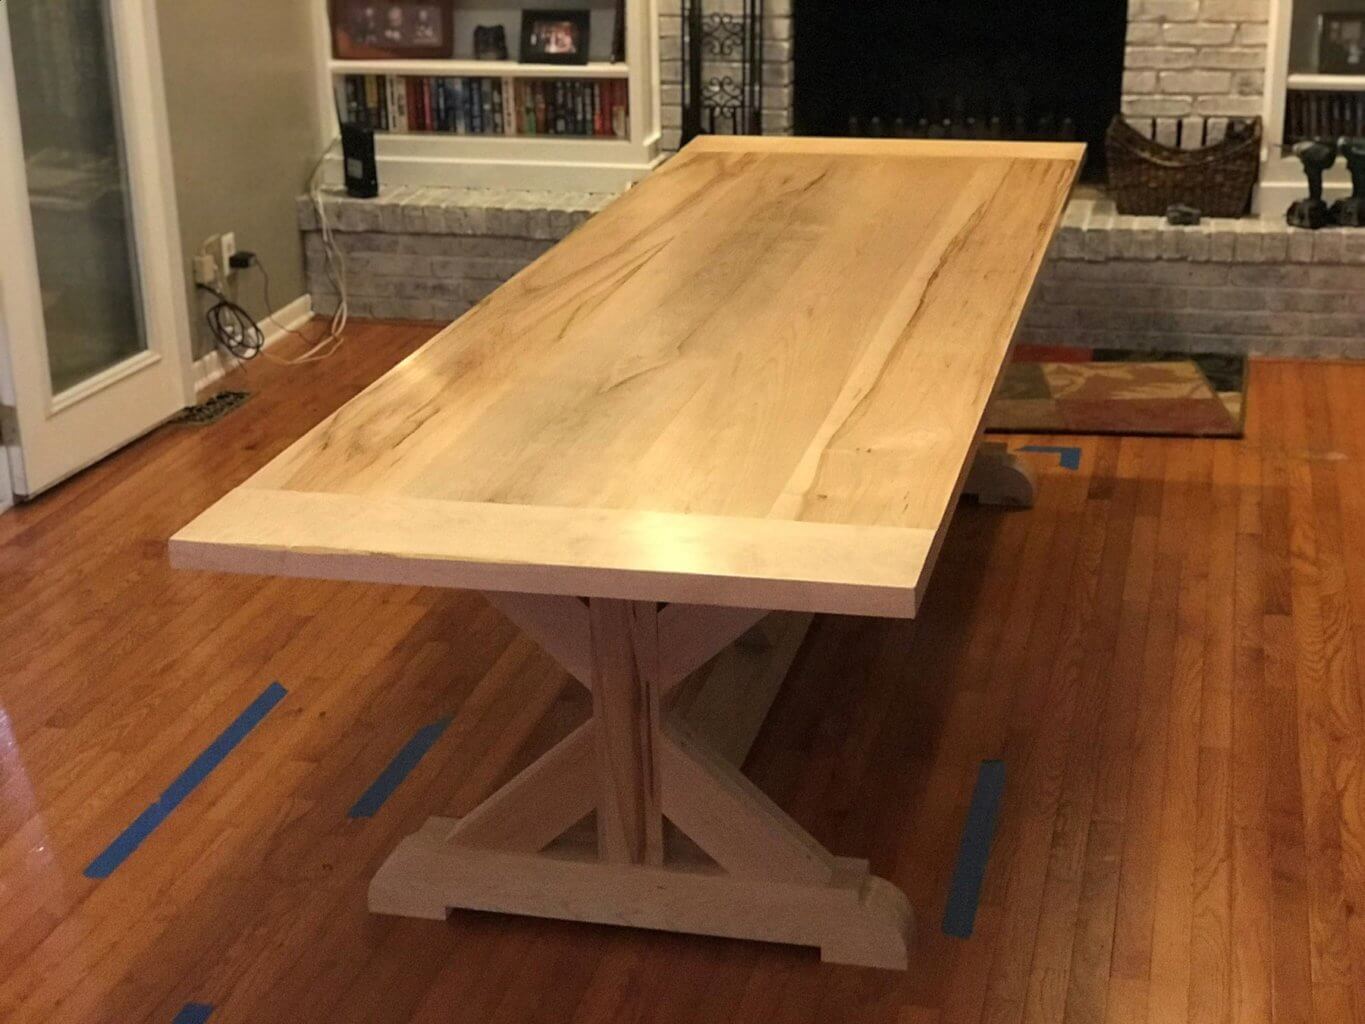 Maple Dining Room Table With Metal Legs